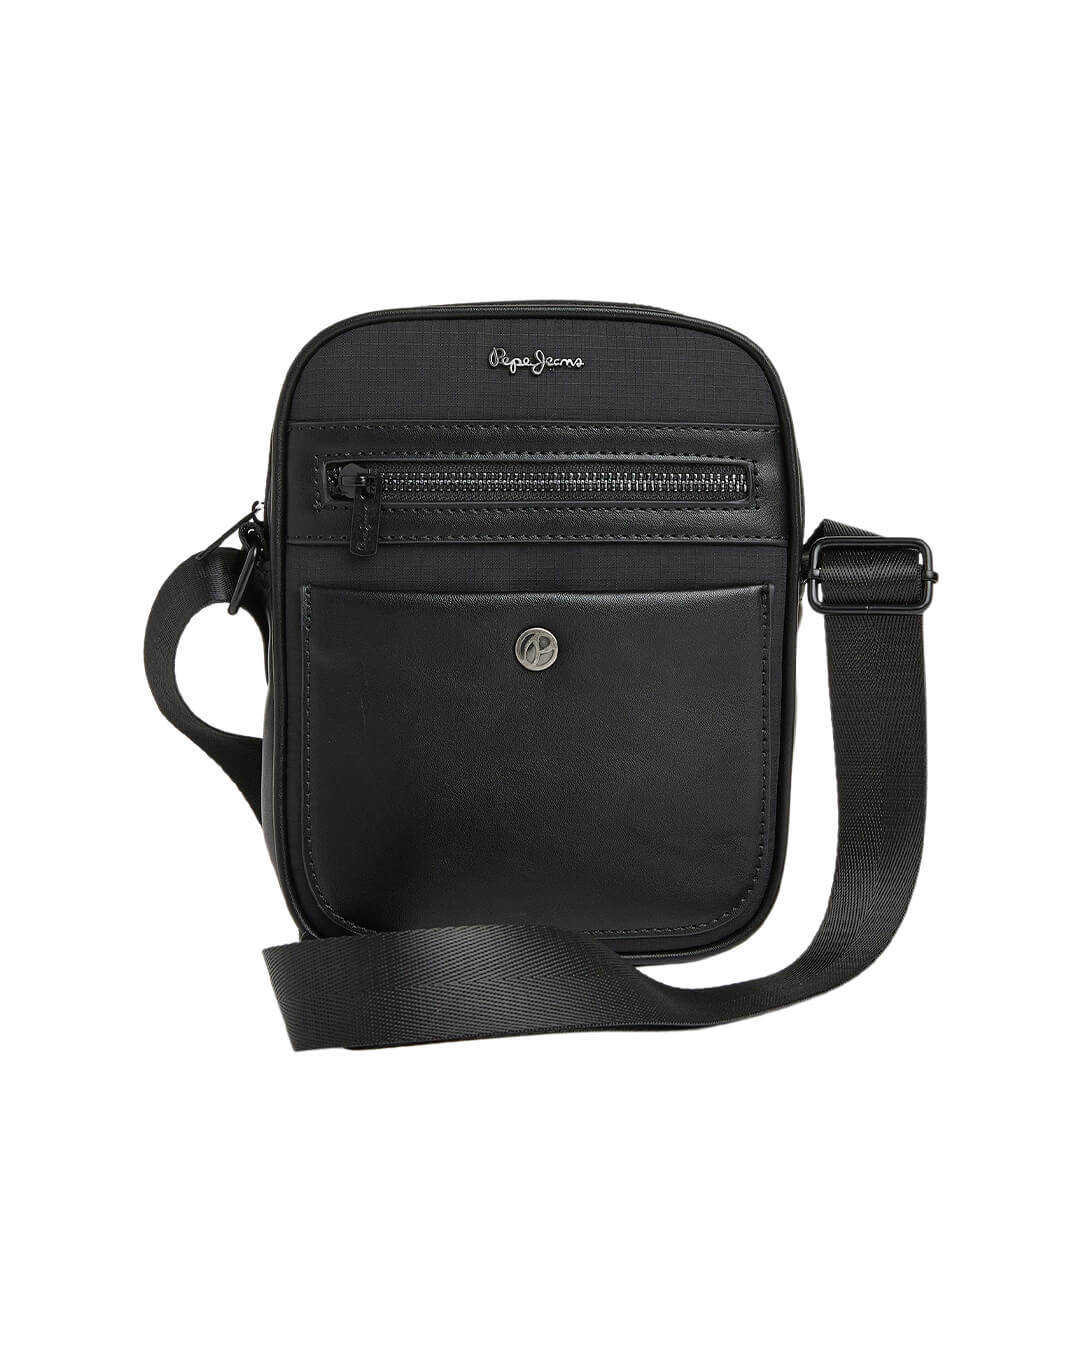 Pepe Jeans Bags ONE Pepe Jeans Ace Black Peter Bag